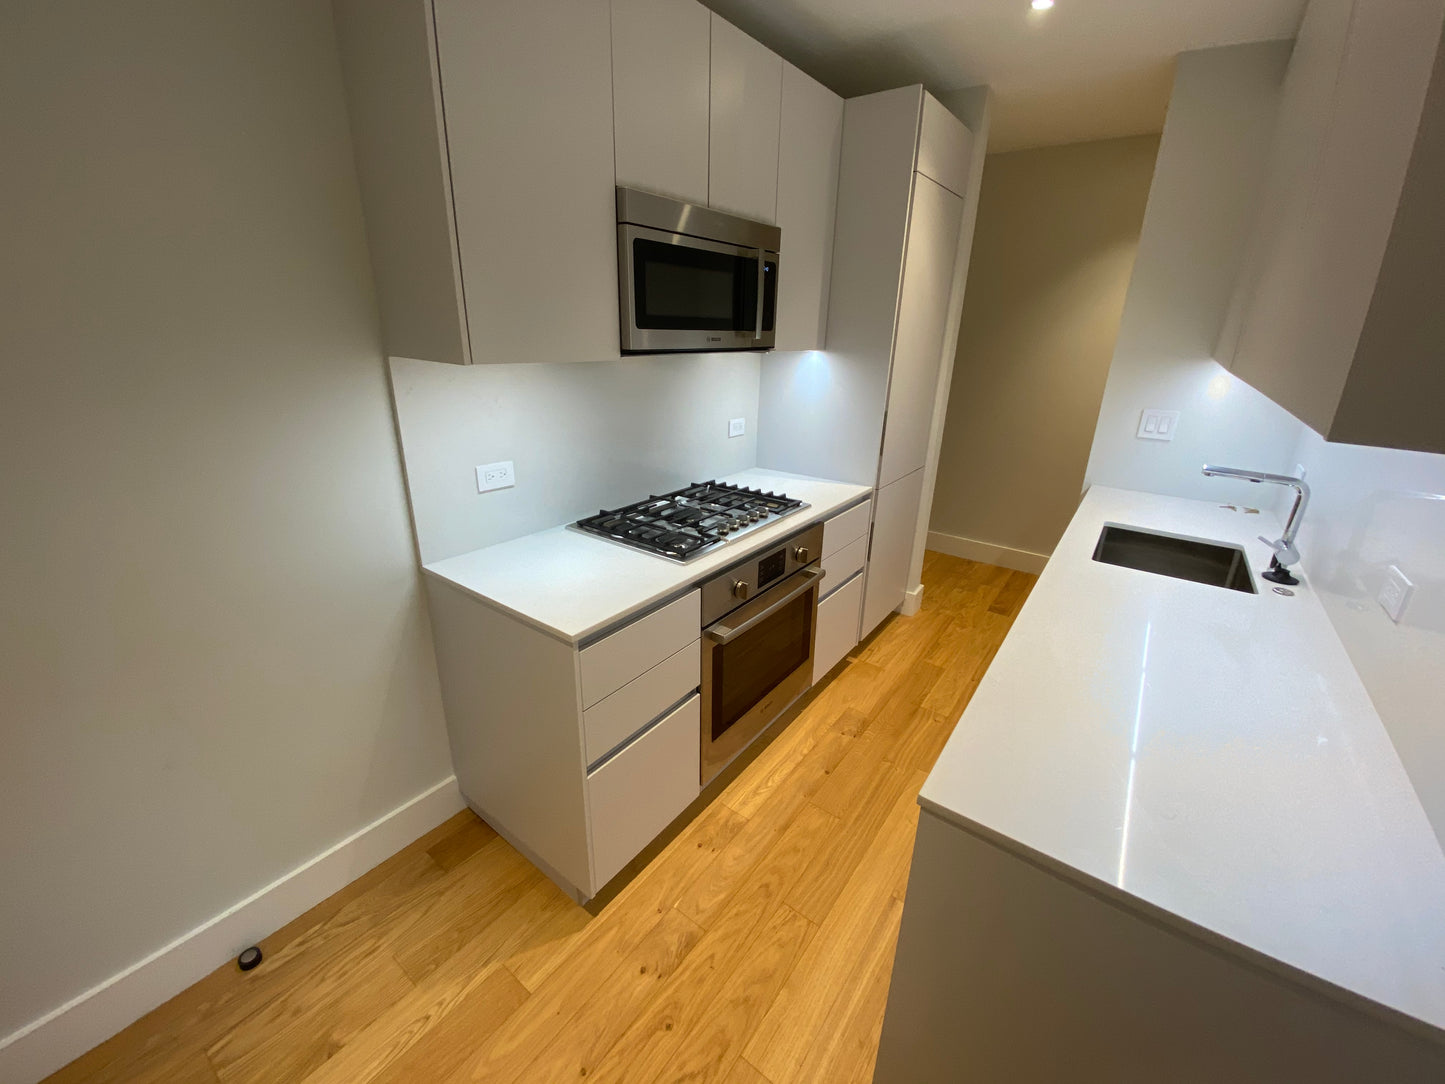 APPLICATION PENDING $2,620 / 585ft2 - ➽Stunning Brighton Pet-Friendly 1 Bedroom Available Now! (Brighton)